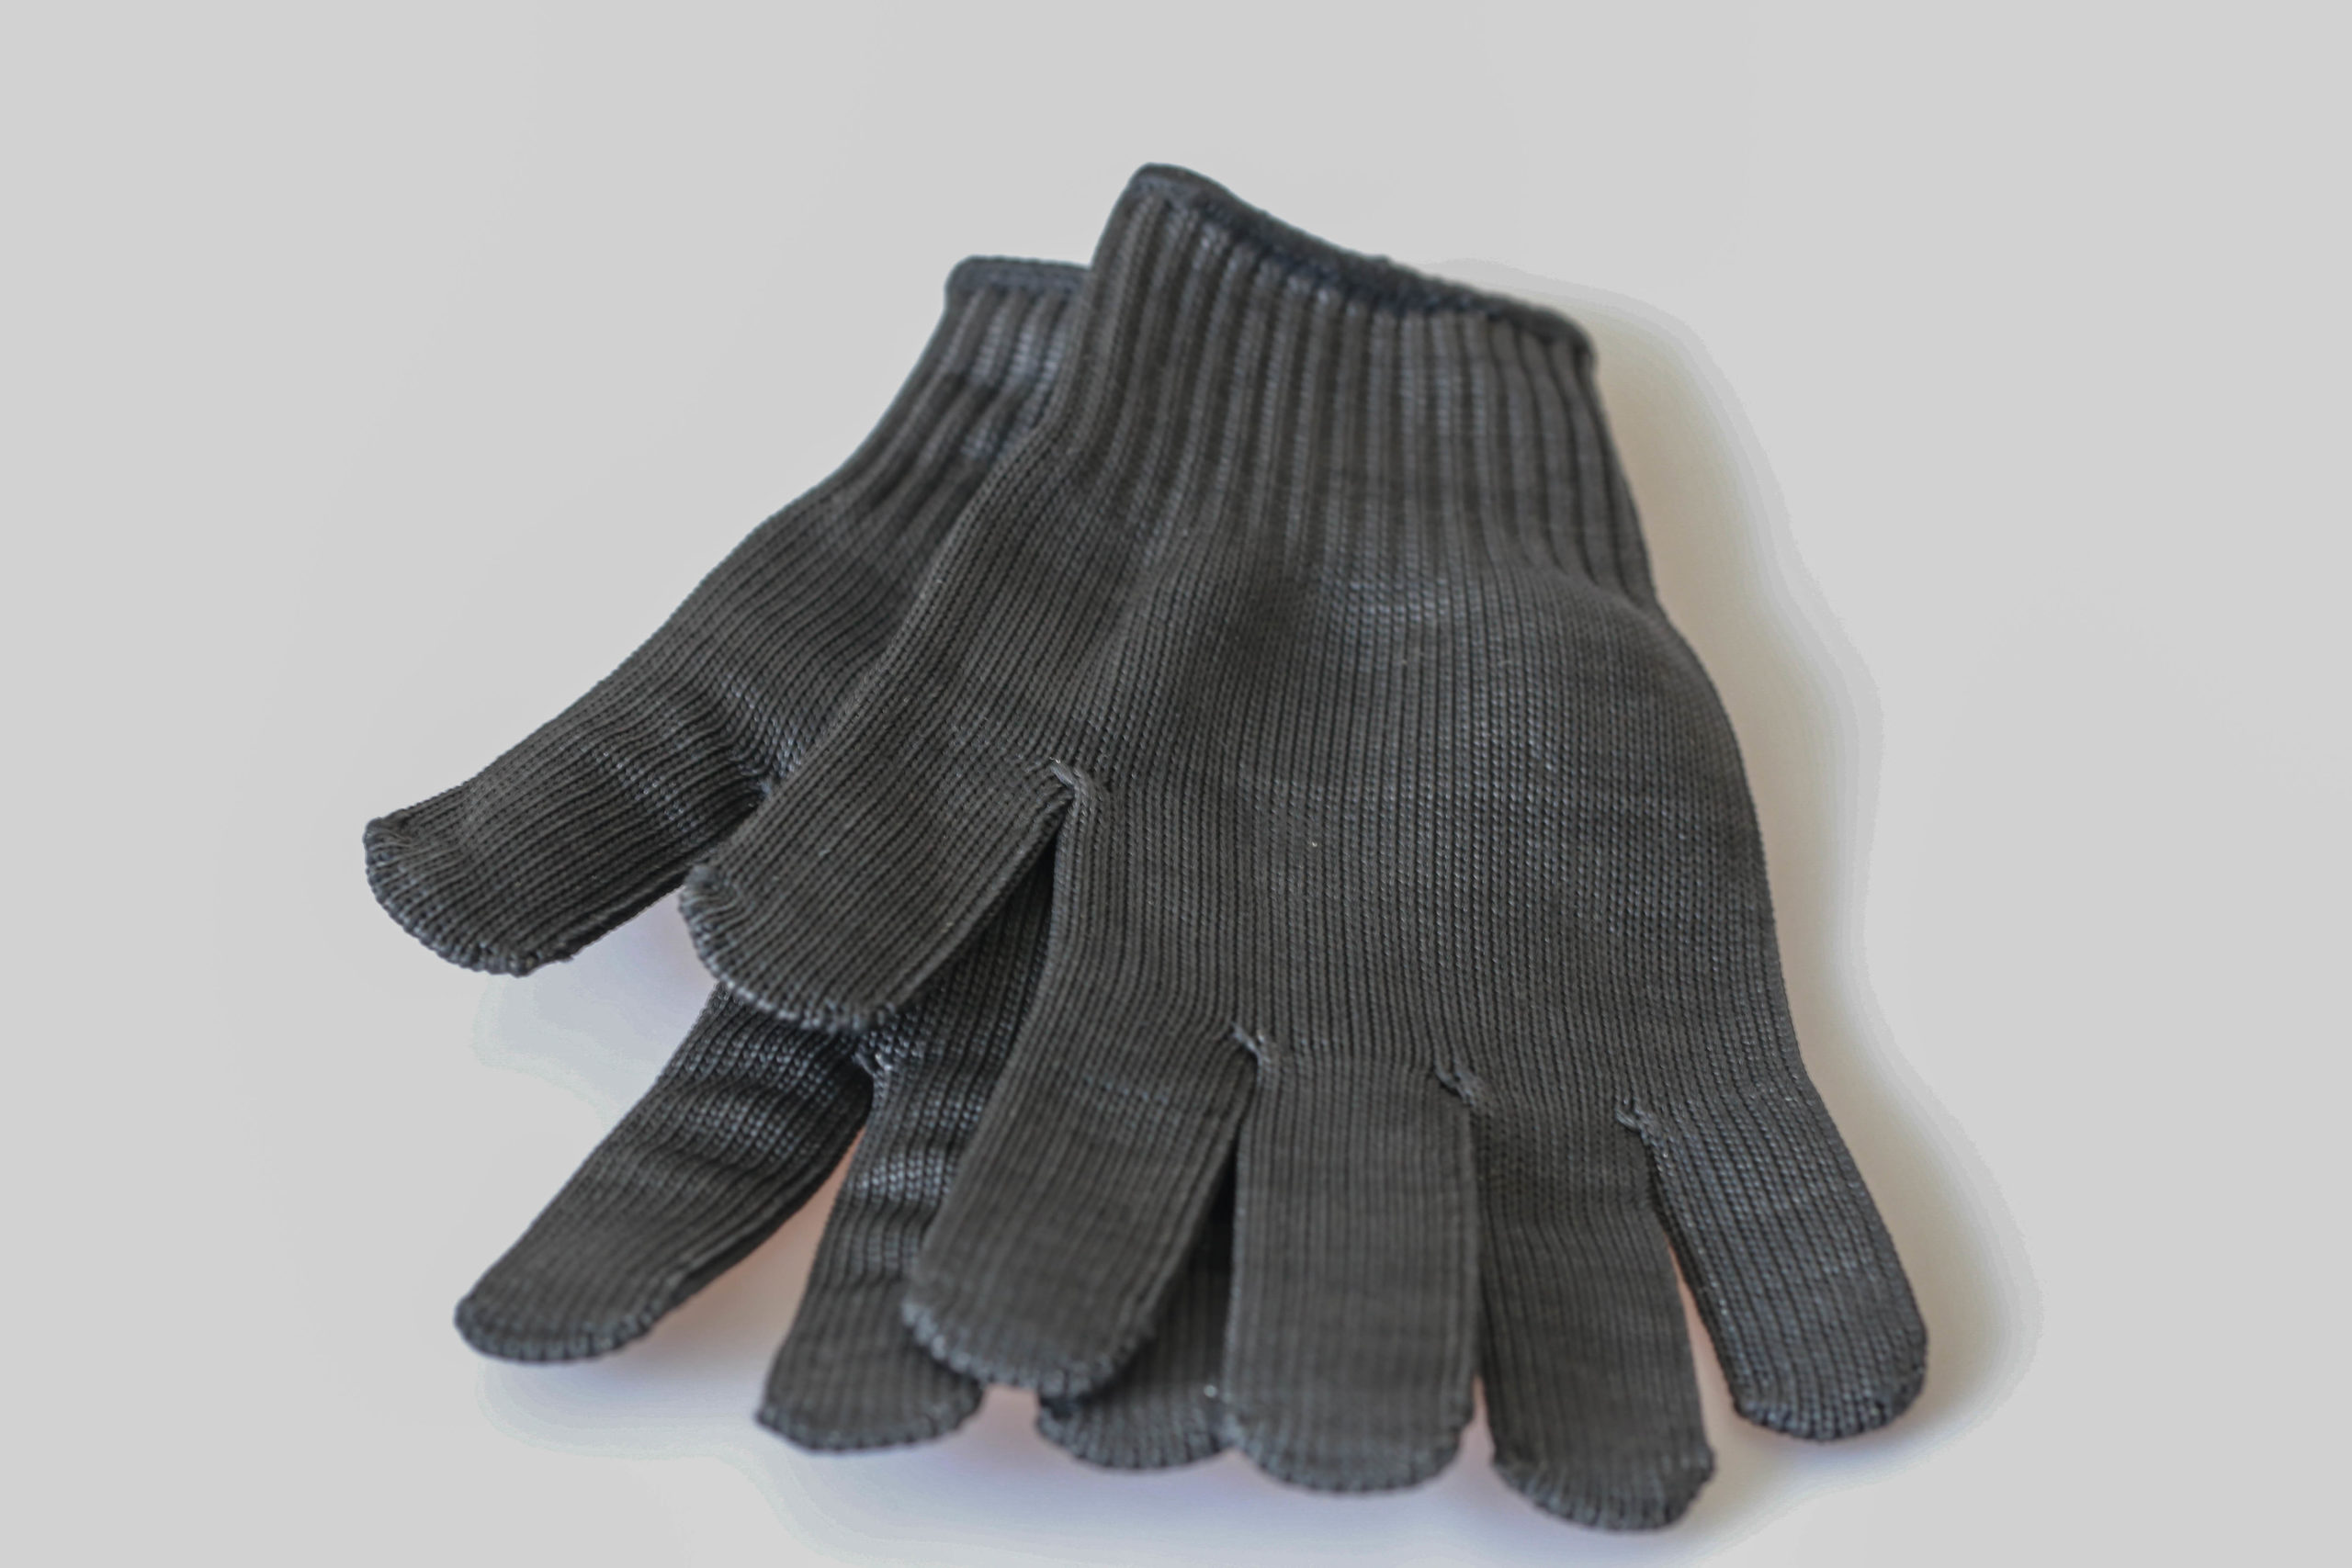 Anti-Cut Safety Leather Gloves - StabApparel-Stab proof clothing ...